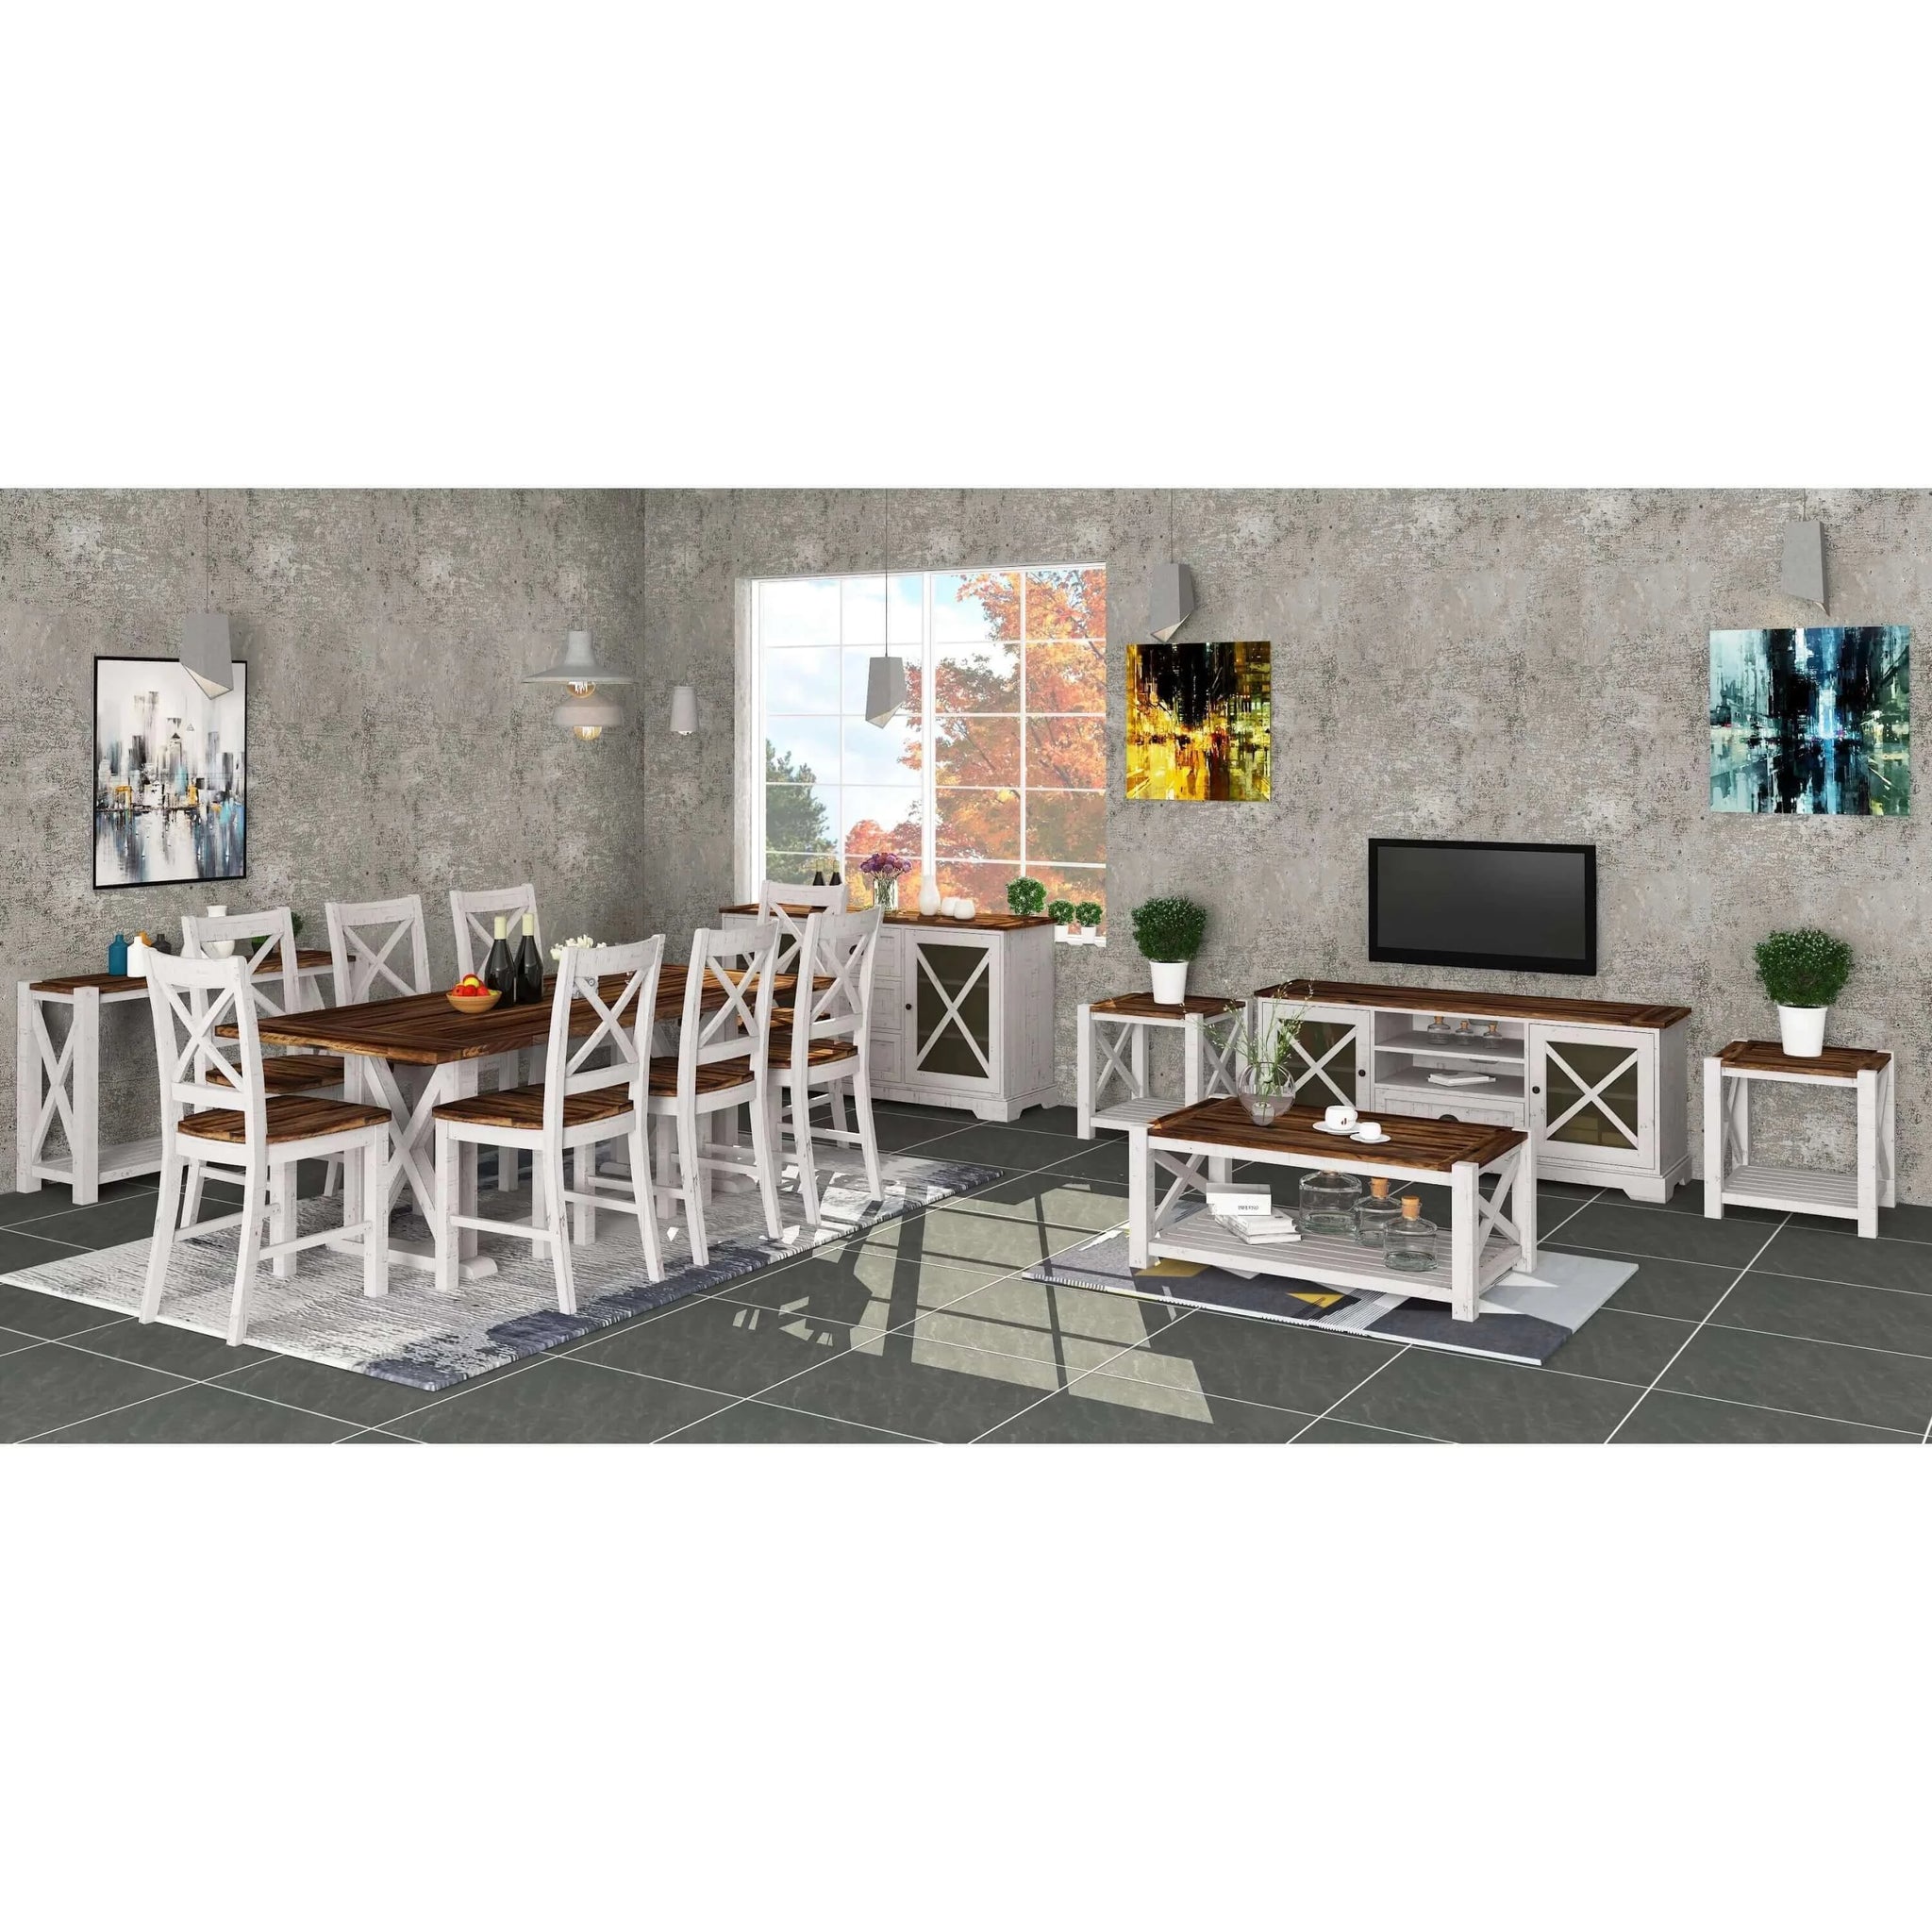 Buy erica 9pc dining set 240cm table 8 chair solid acacia wood timber brown white - upinteriors-Upinteriors